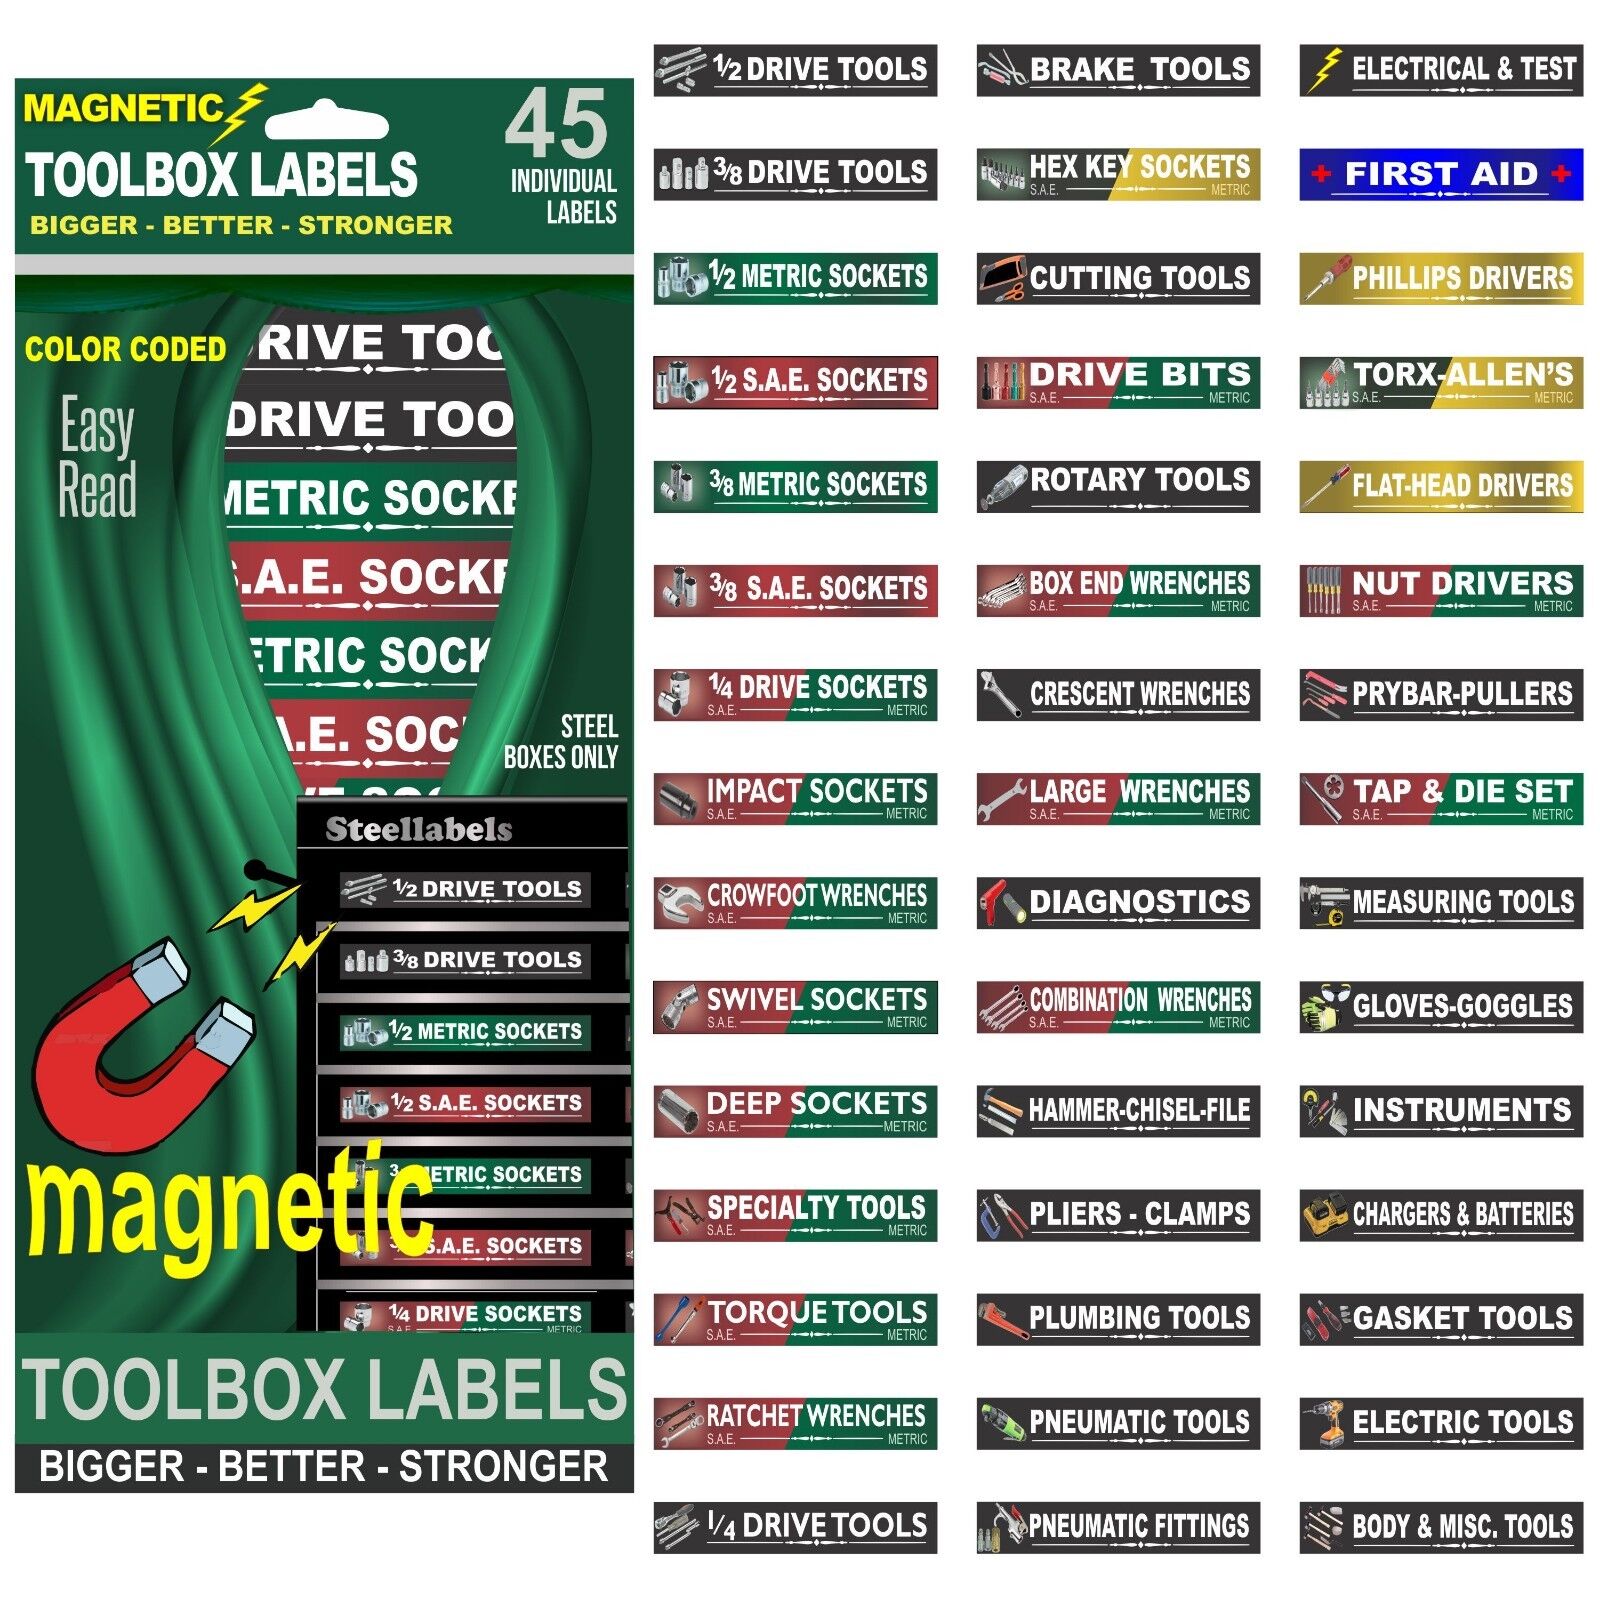 Ultimate Magnetic TOOLBOX LABELS fits all steel boxes tool chest & cabinets  SteelLabels.com UMAGG001